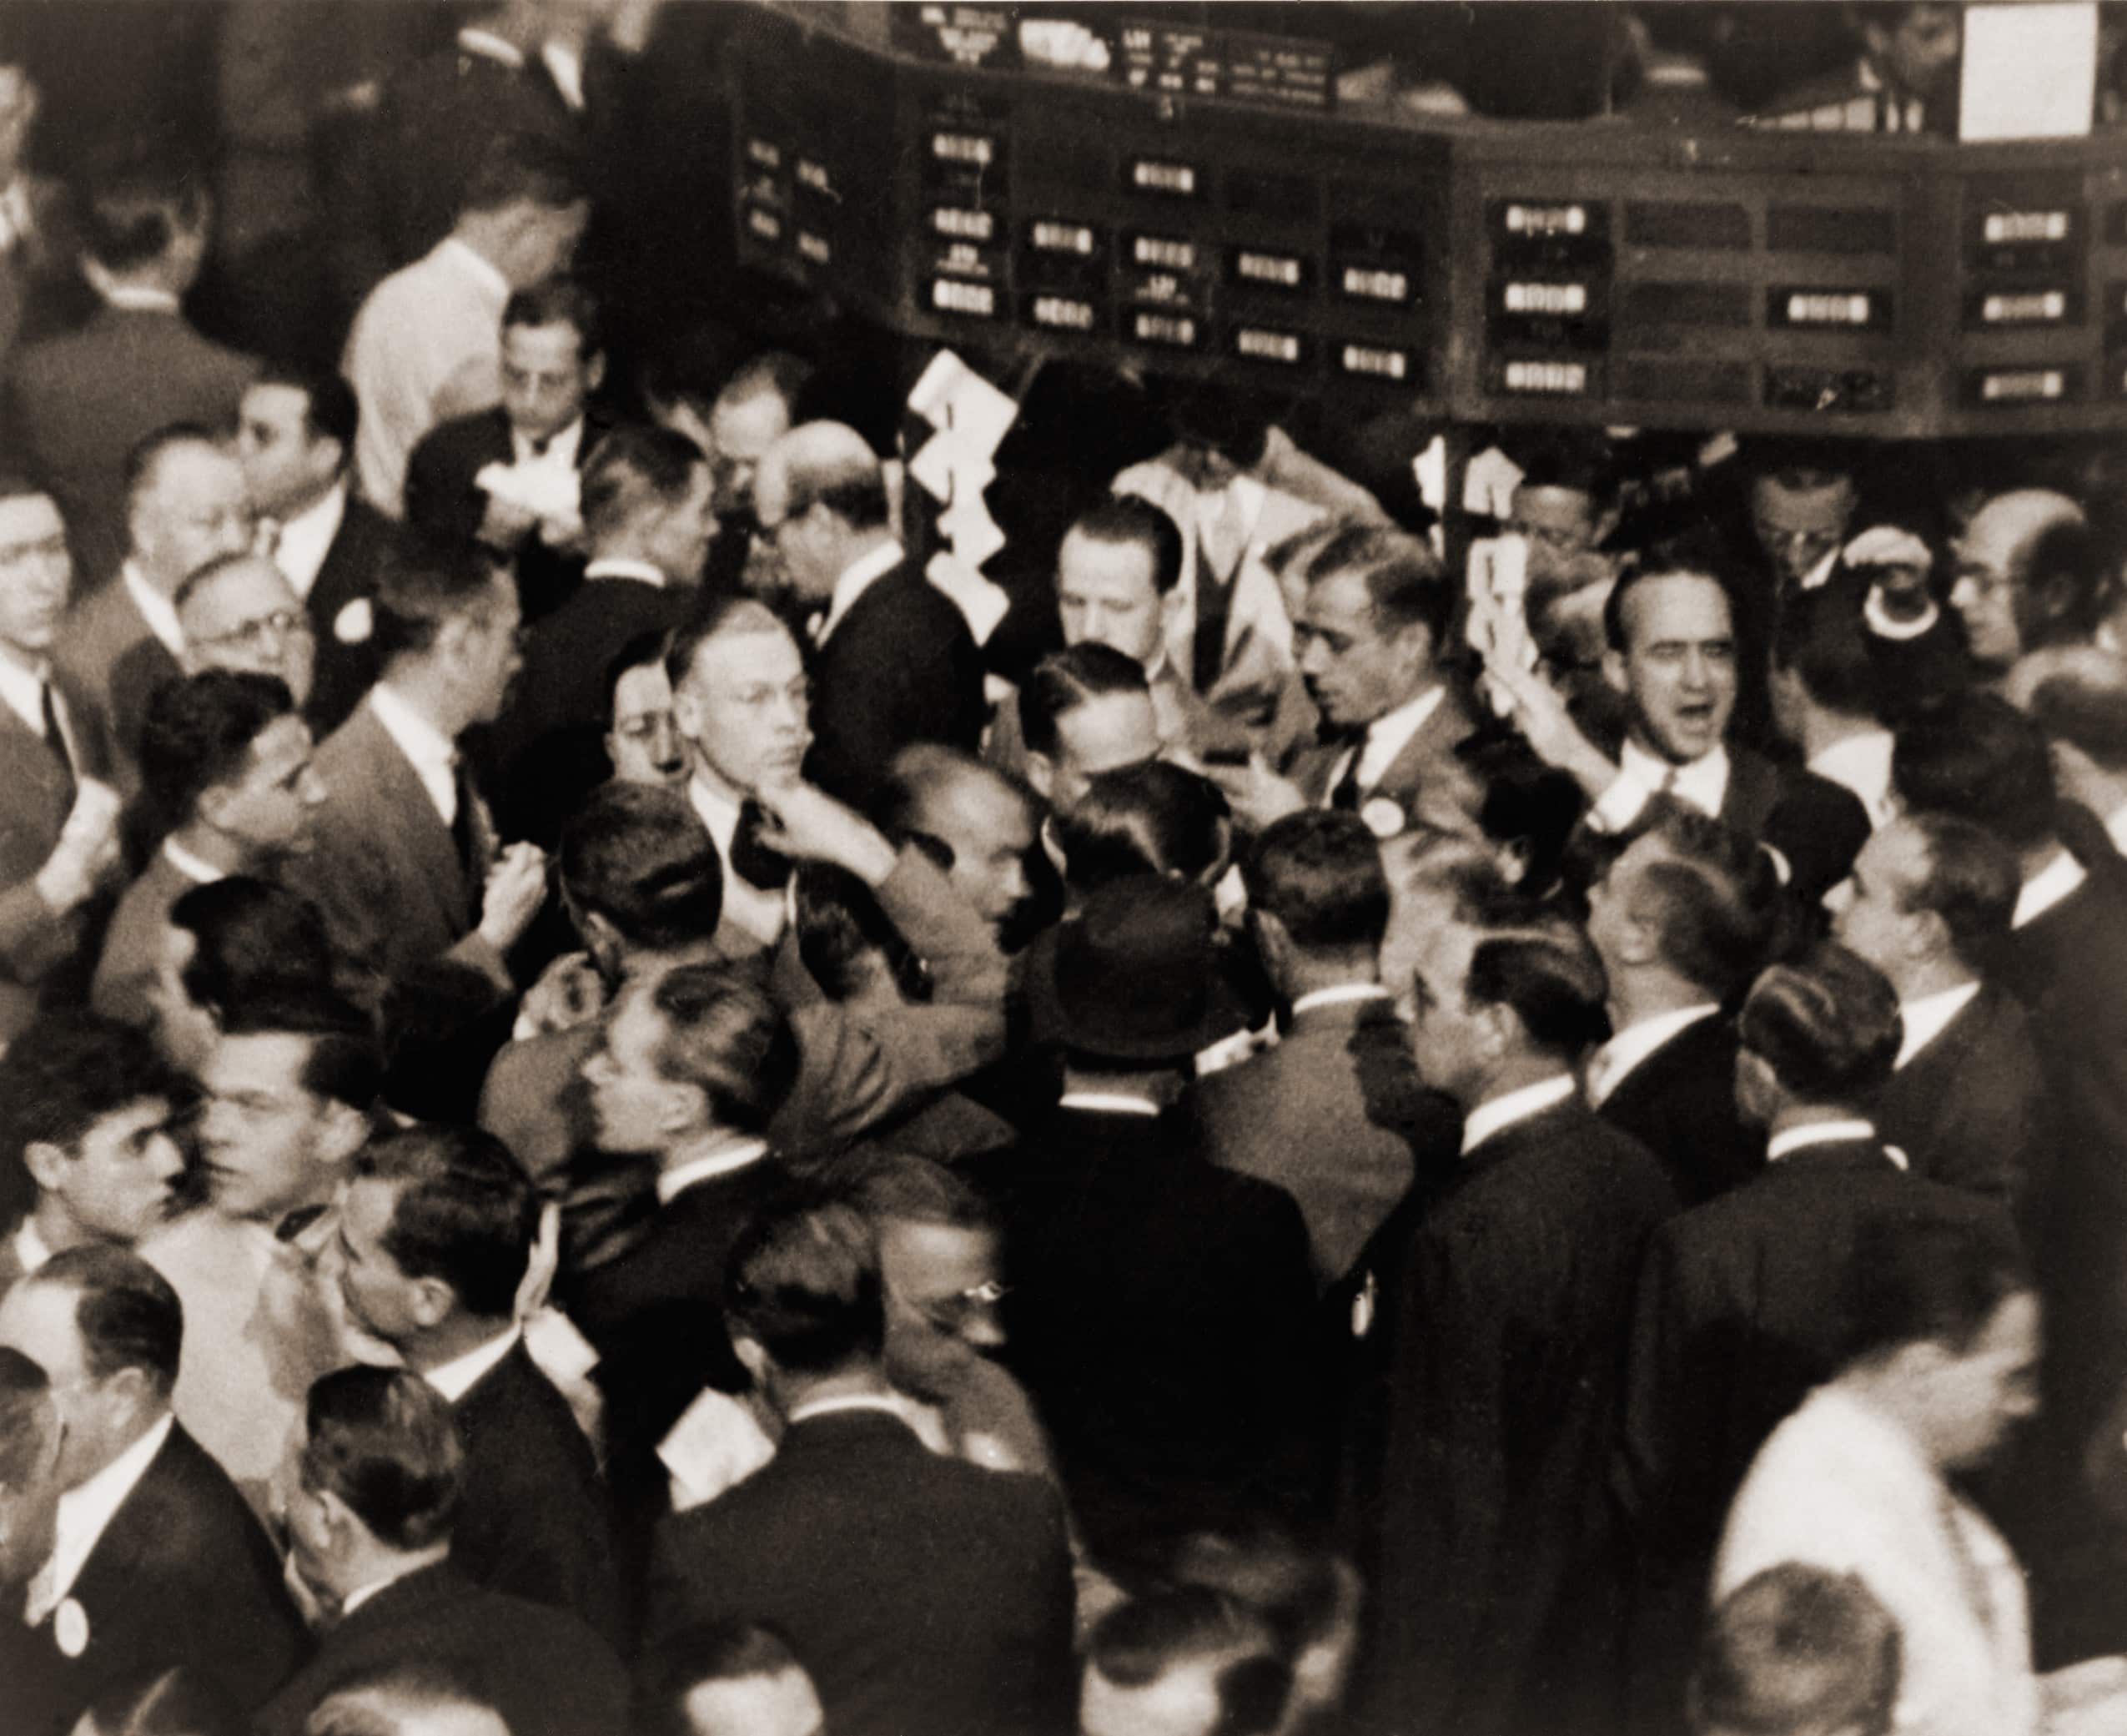 Stock traders on the floor of the New York Stock Exchange circa 1936